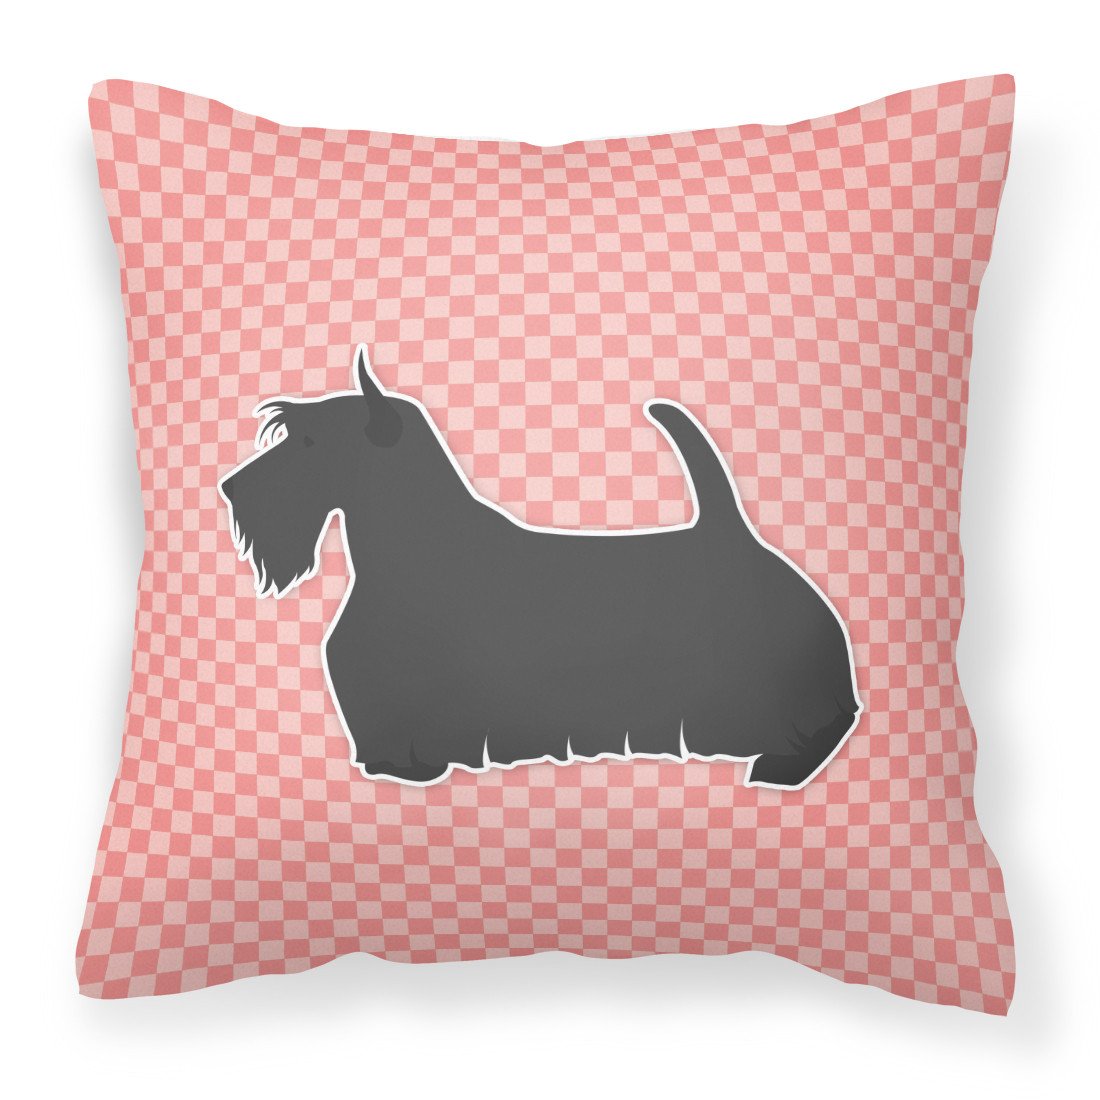 Scottish Terrier Checkerboard Pink Fabric Decorative Pillow BB3669PW1818 by Caroline's Treasures